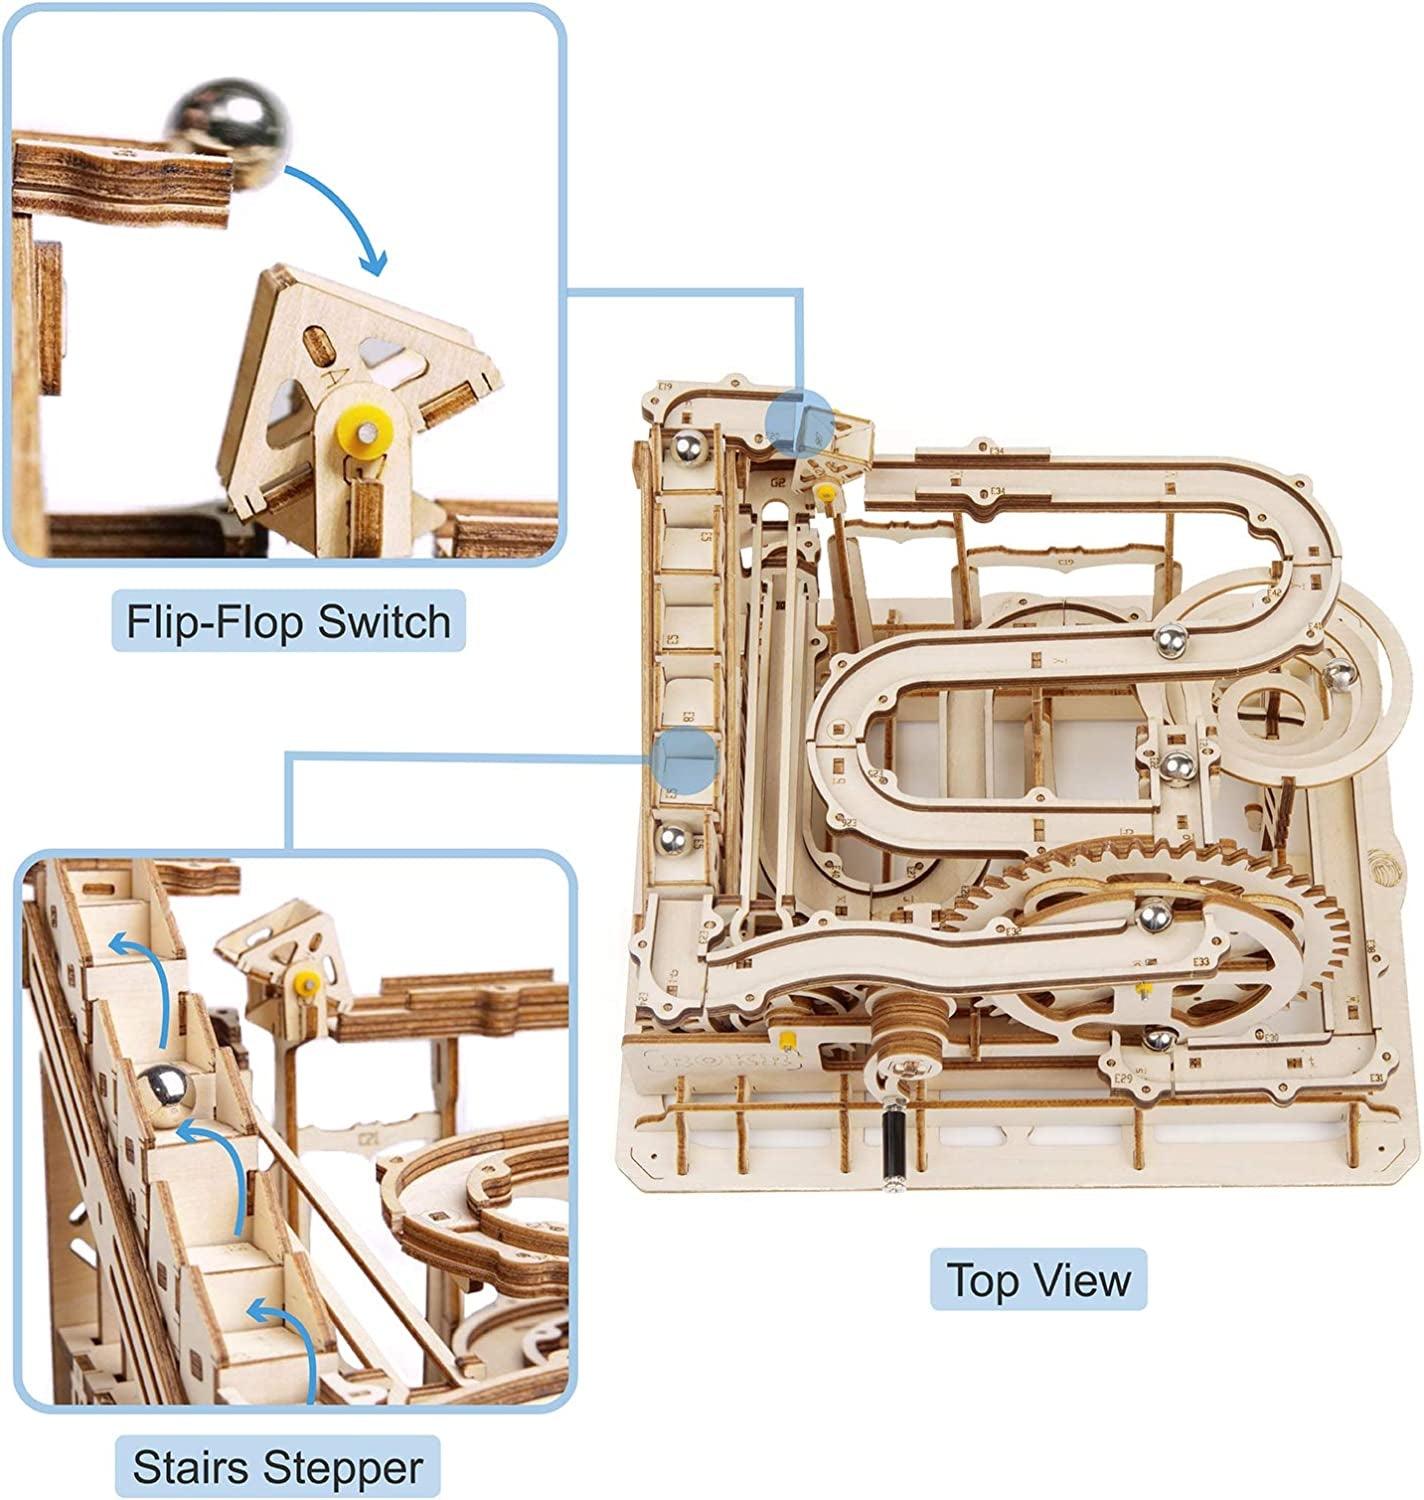 3D Wooden Puzzles Marble Run Set - Mechanical Model Kit for Adults DIY Roller Coaster Toys - WoodArtSupply